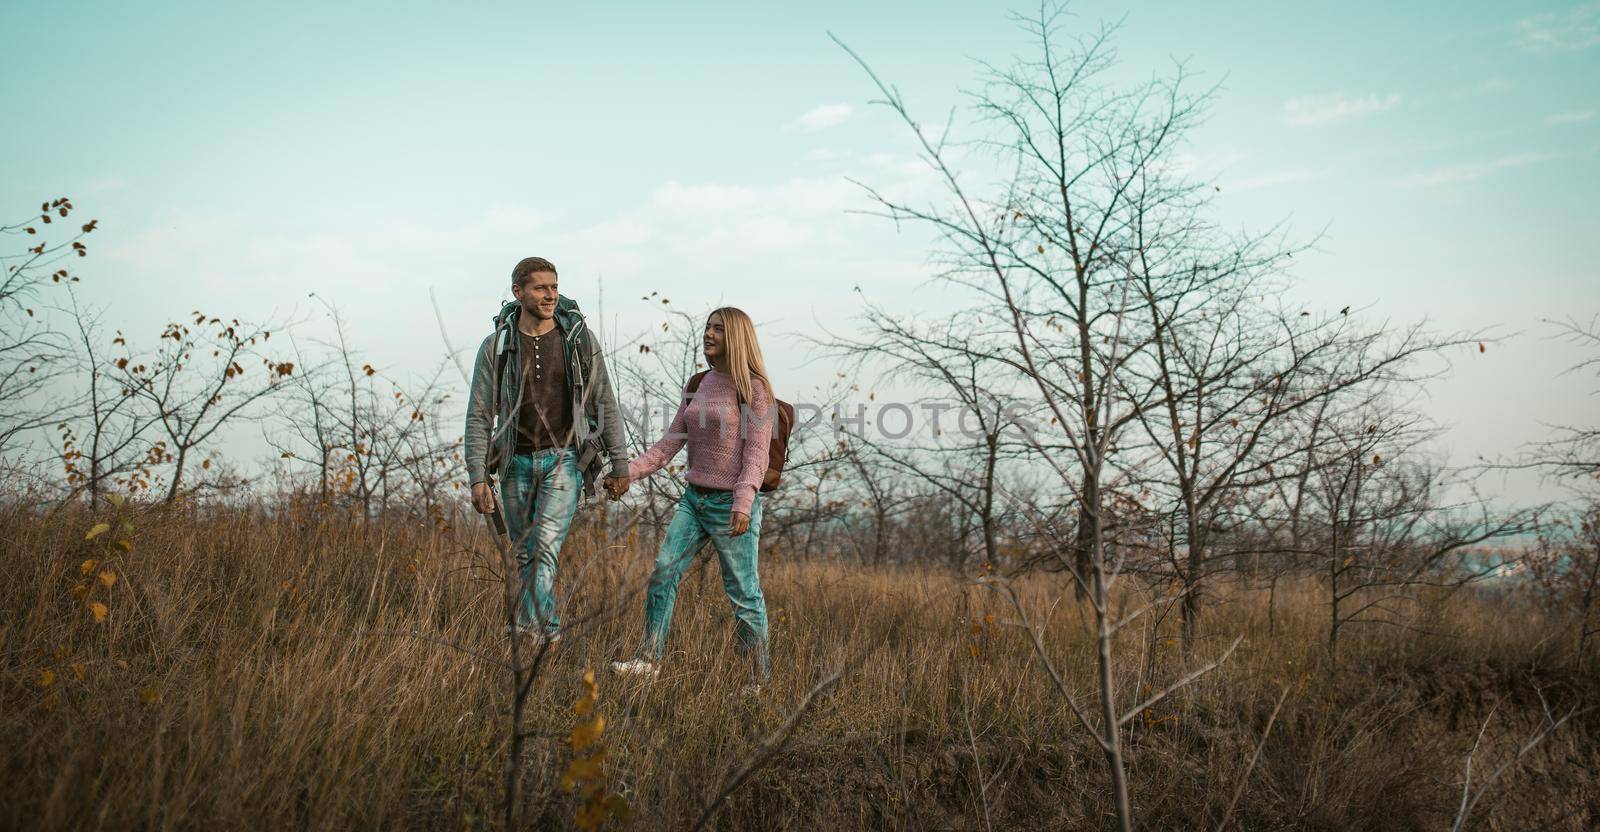 Cheerful Man And Woman Walk Outdors Holding Hands by LipikStockMedia